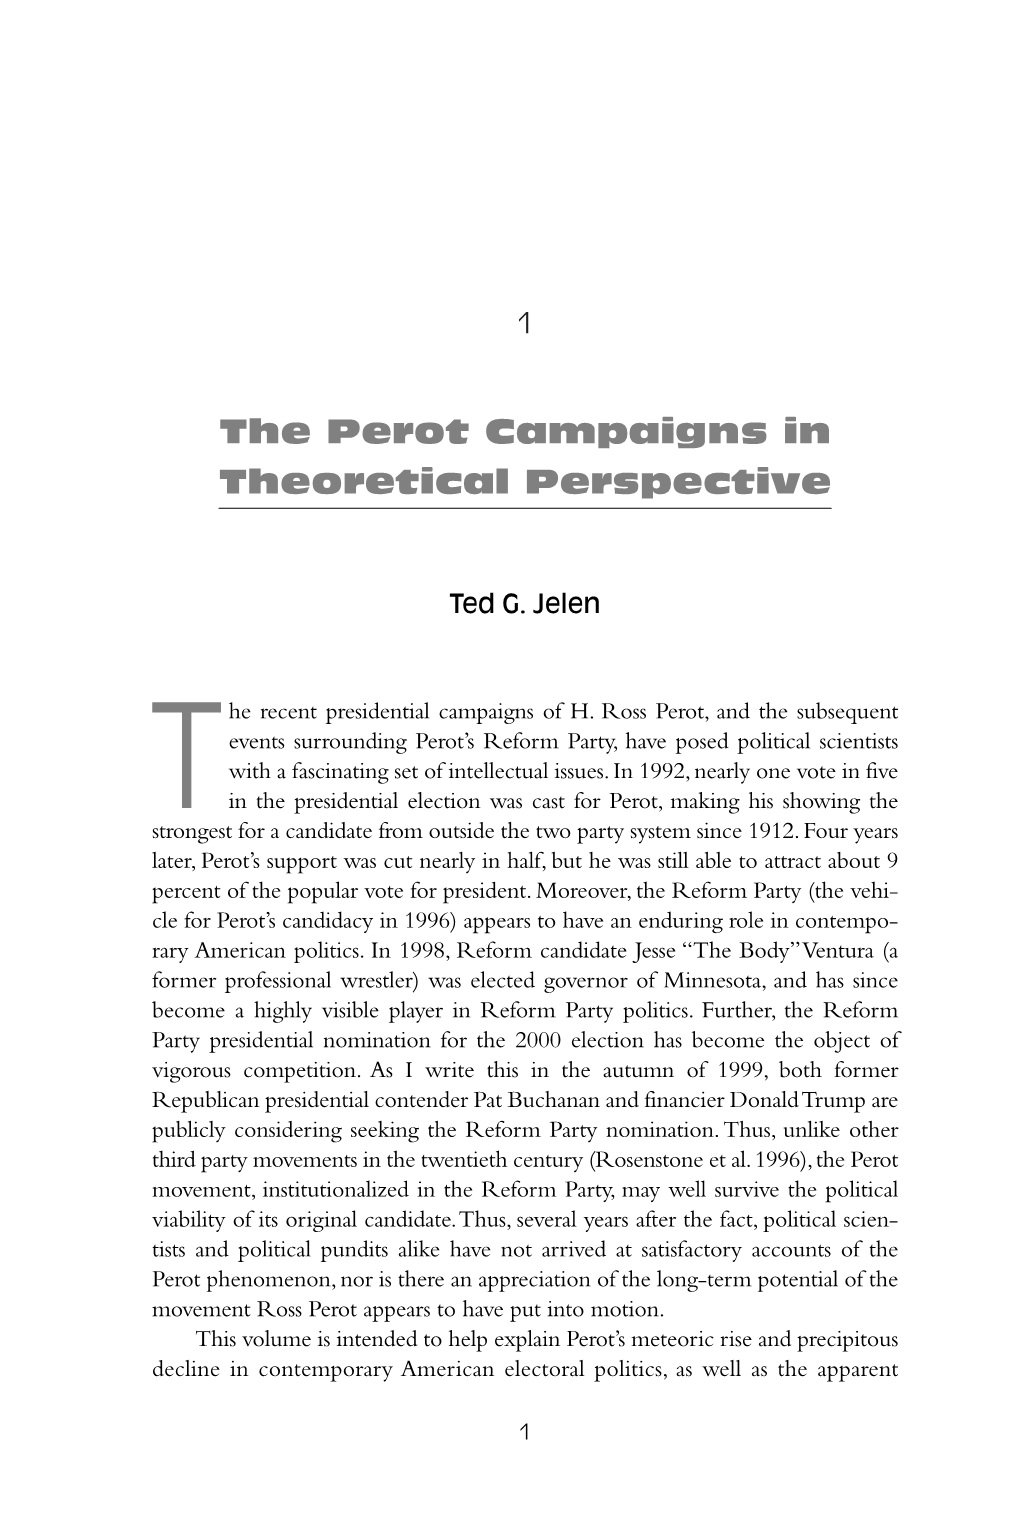 The Perot Campaigns in Theoretical Perspective